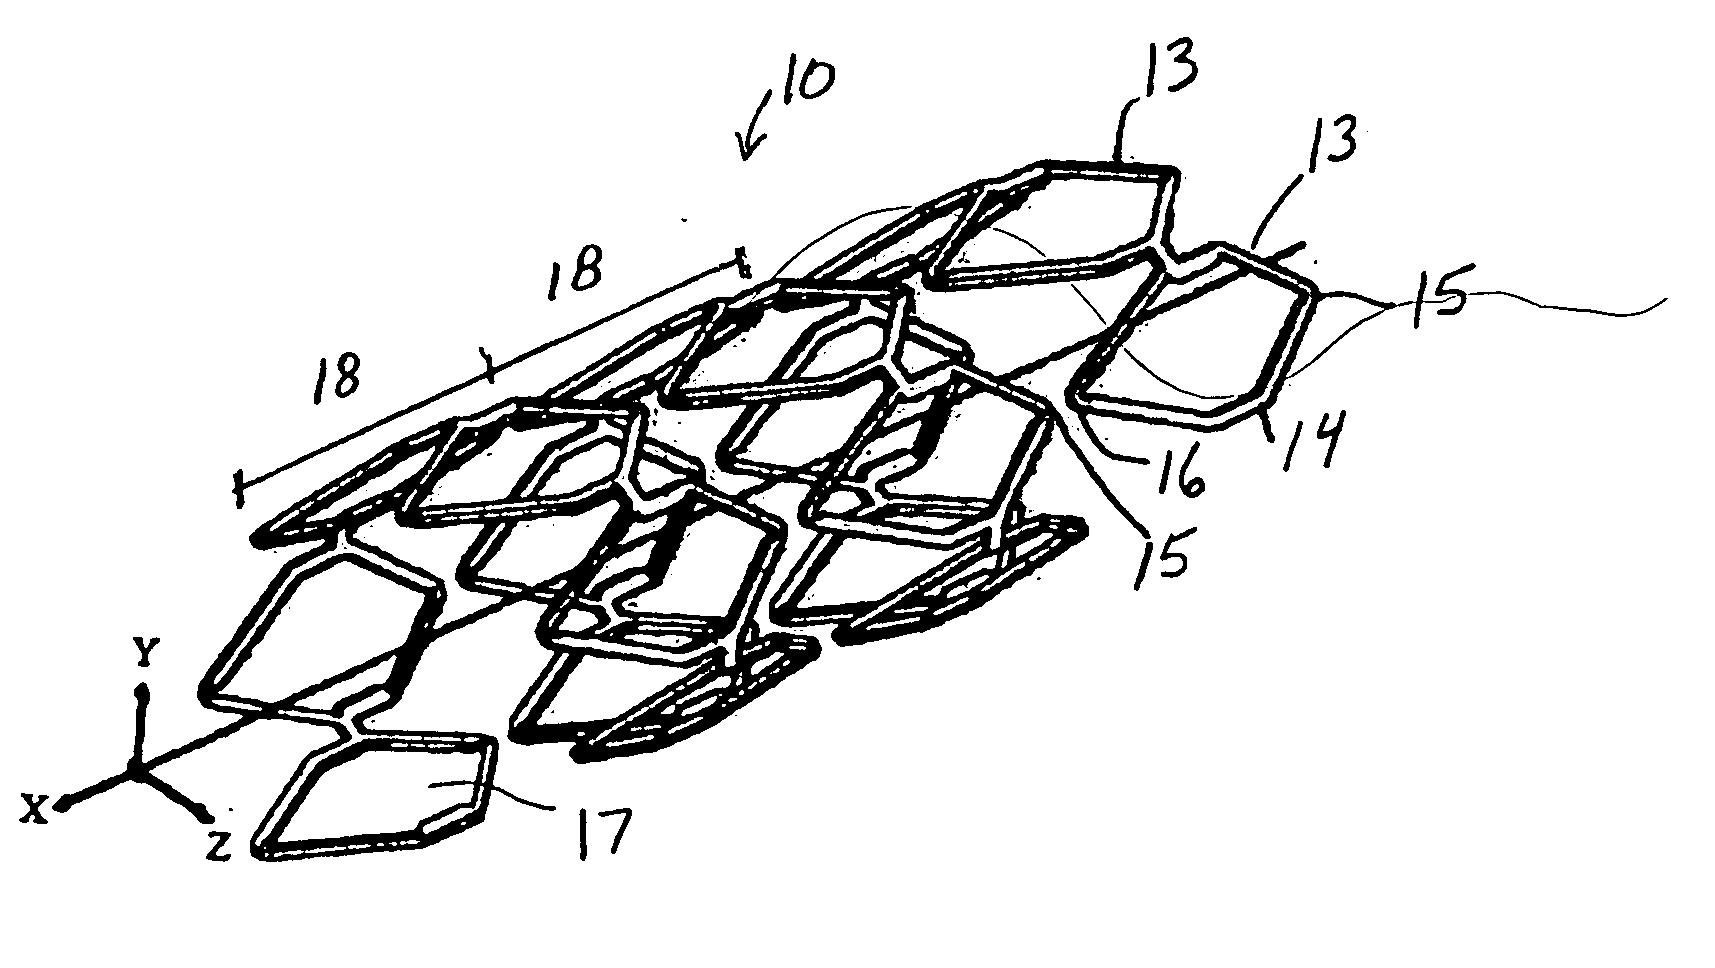 Fracture-resistant helical stent incorporating bistable cells and methods of use